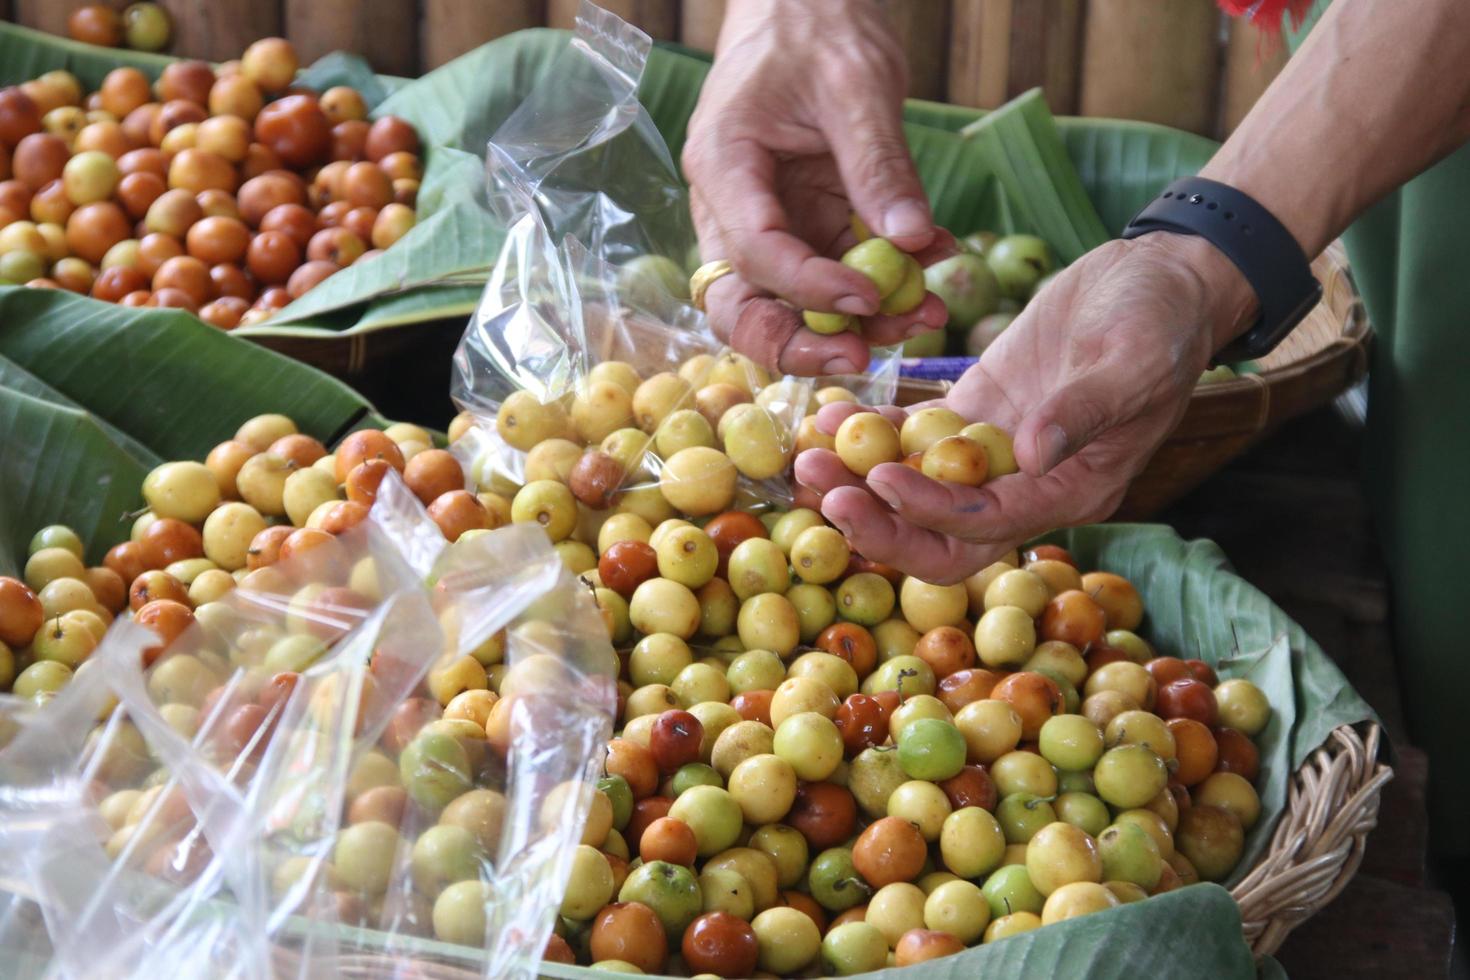 A hand selecting Monkey Apples in basket. Monkey Apples have dark and light brown, yellow and light green color. photo